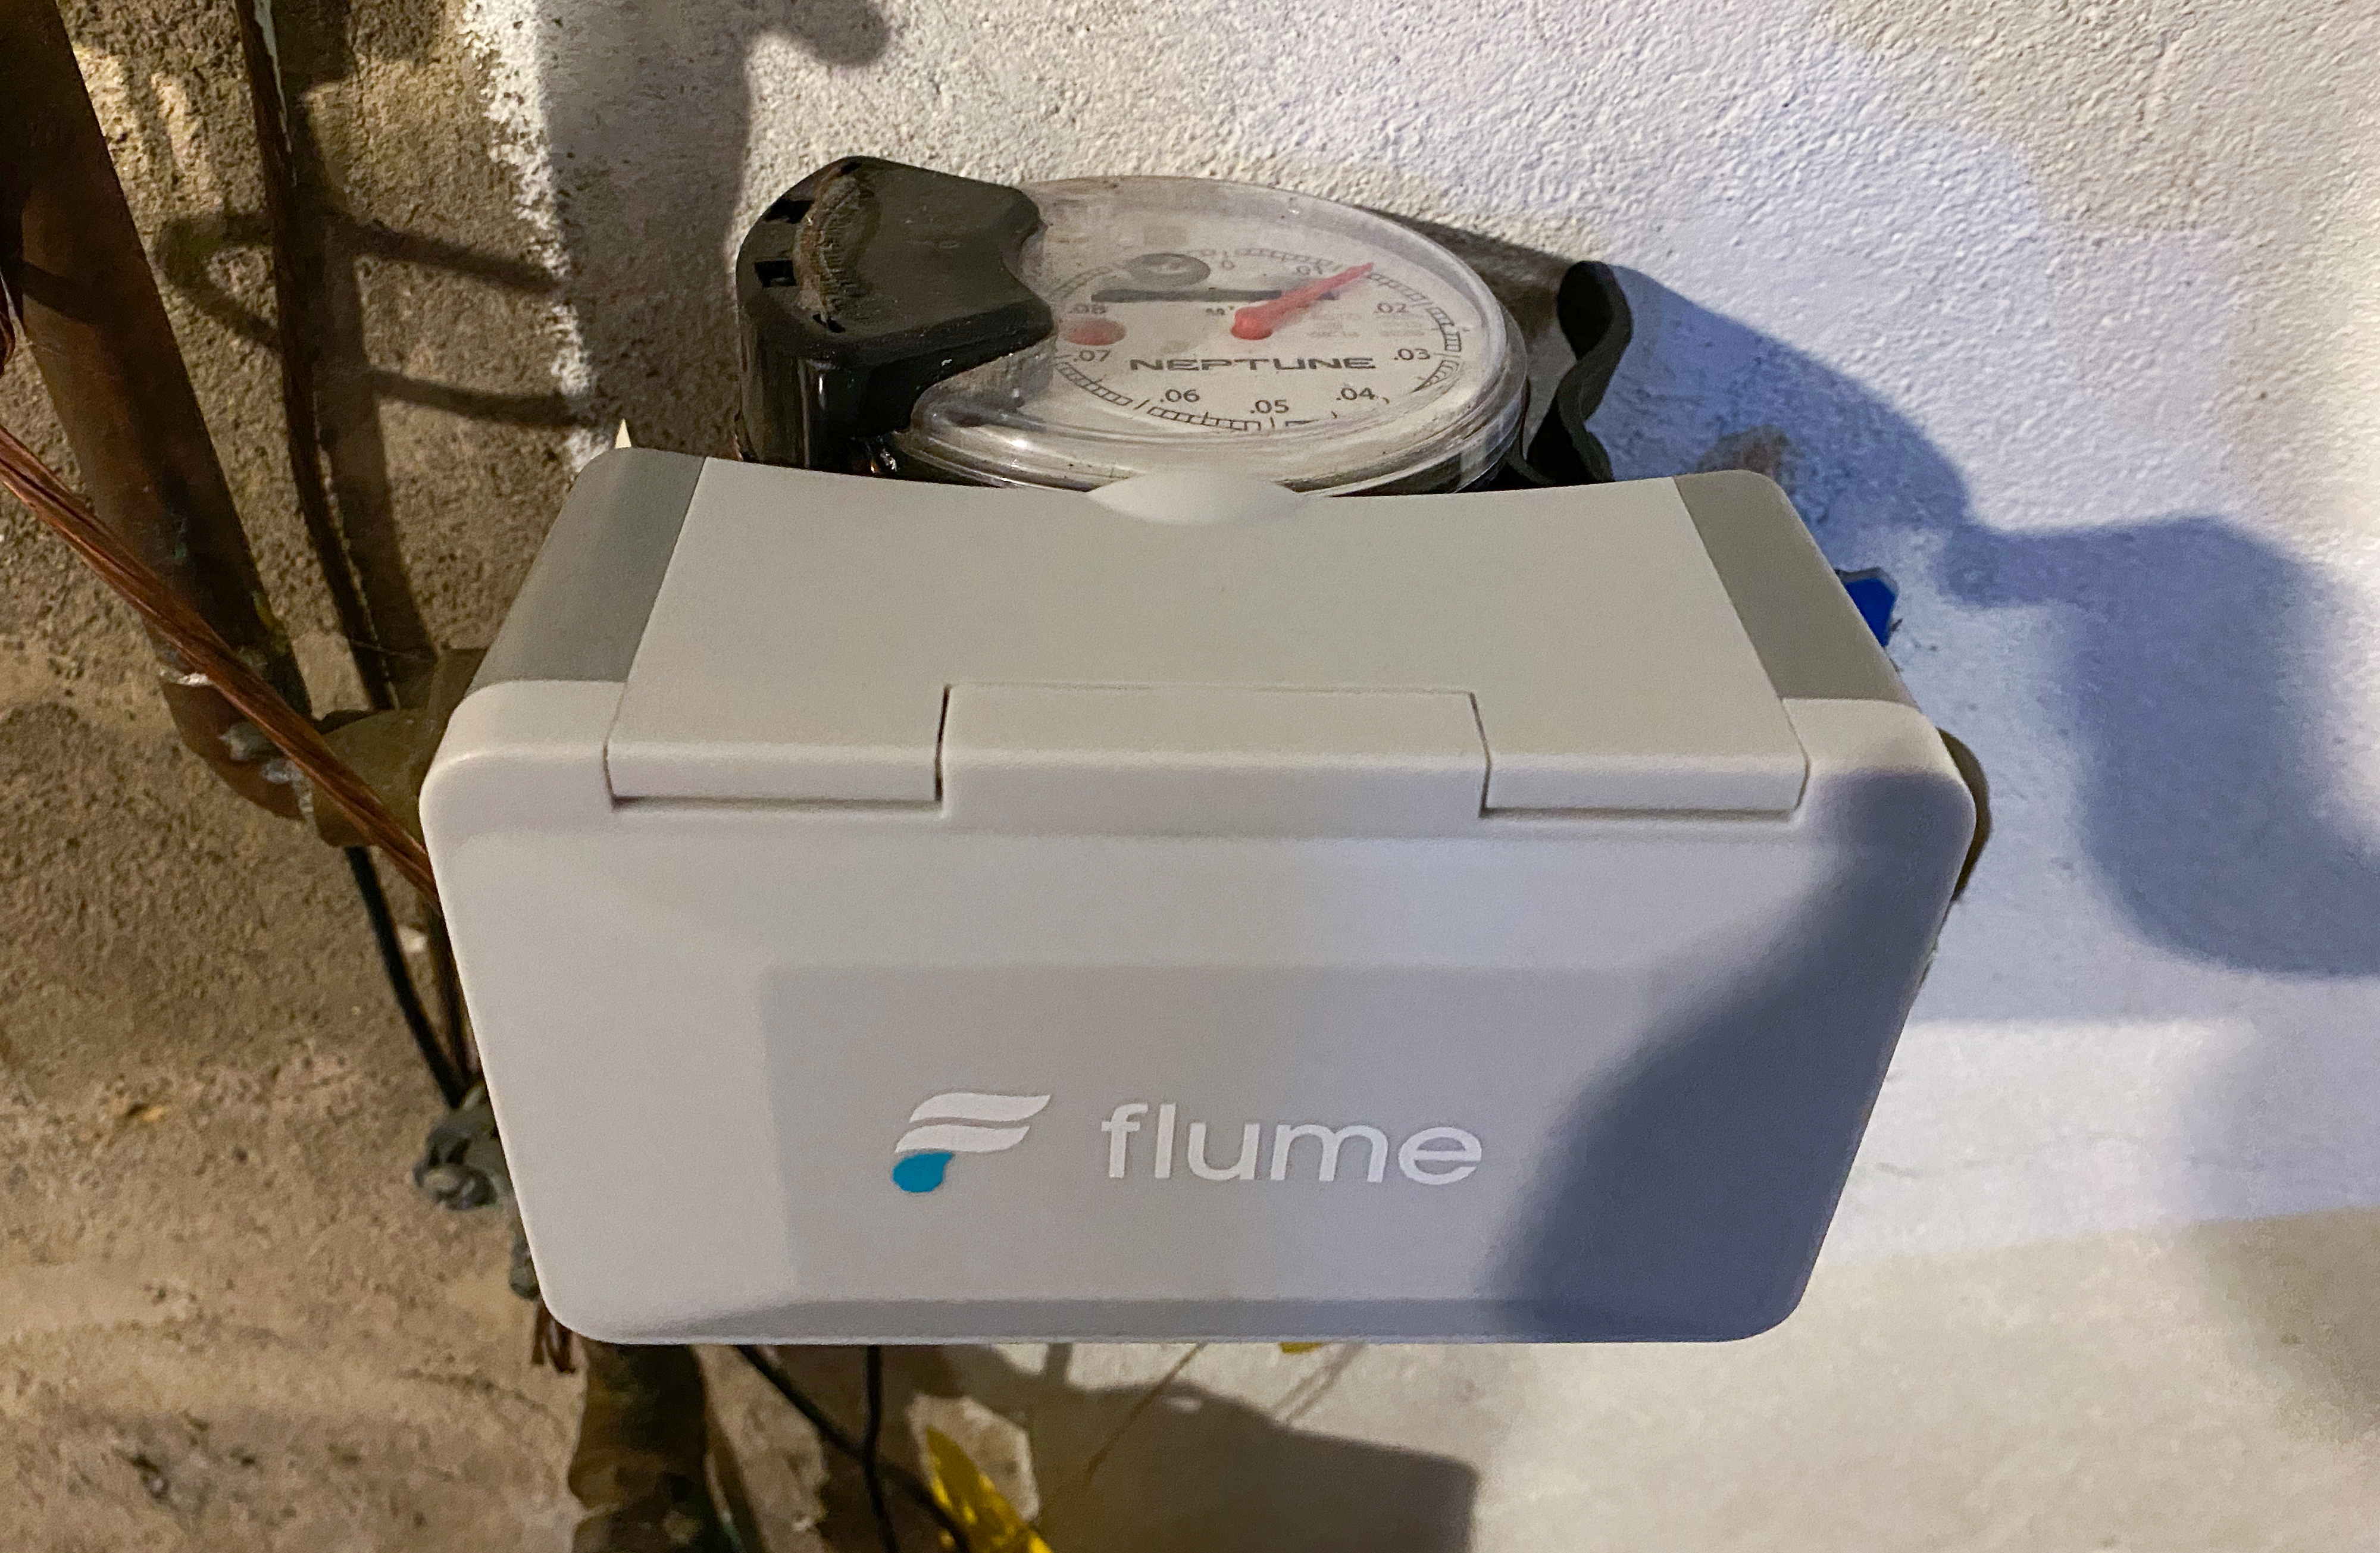 the-flume-2-smart-home-water-monitor-is-a-smart-easy-to-use-and